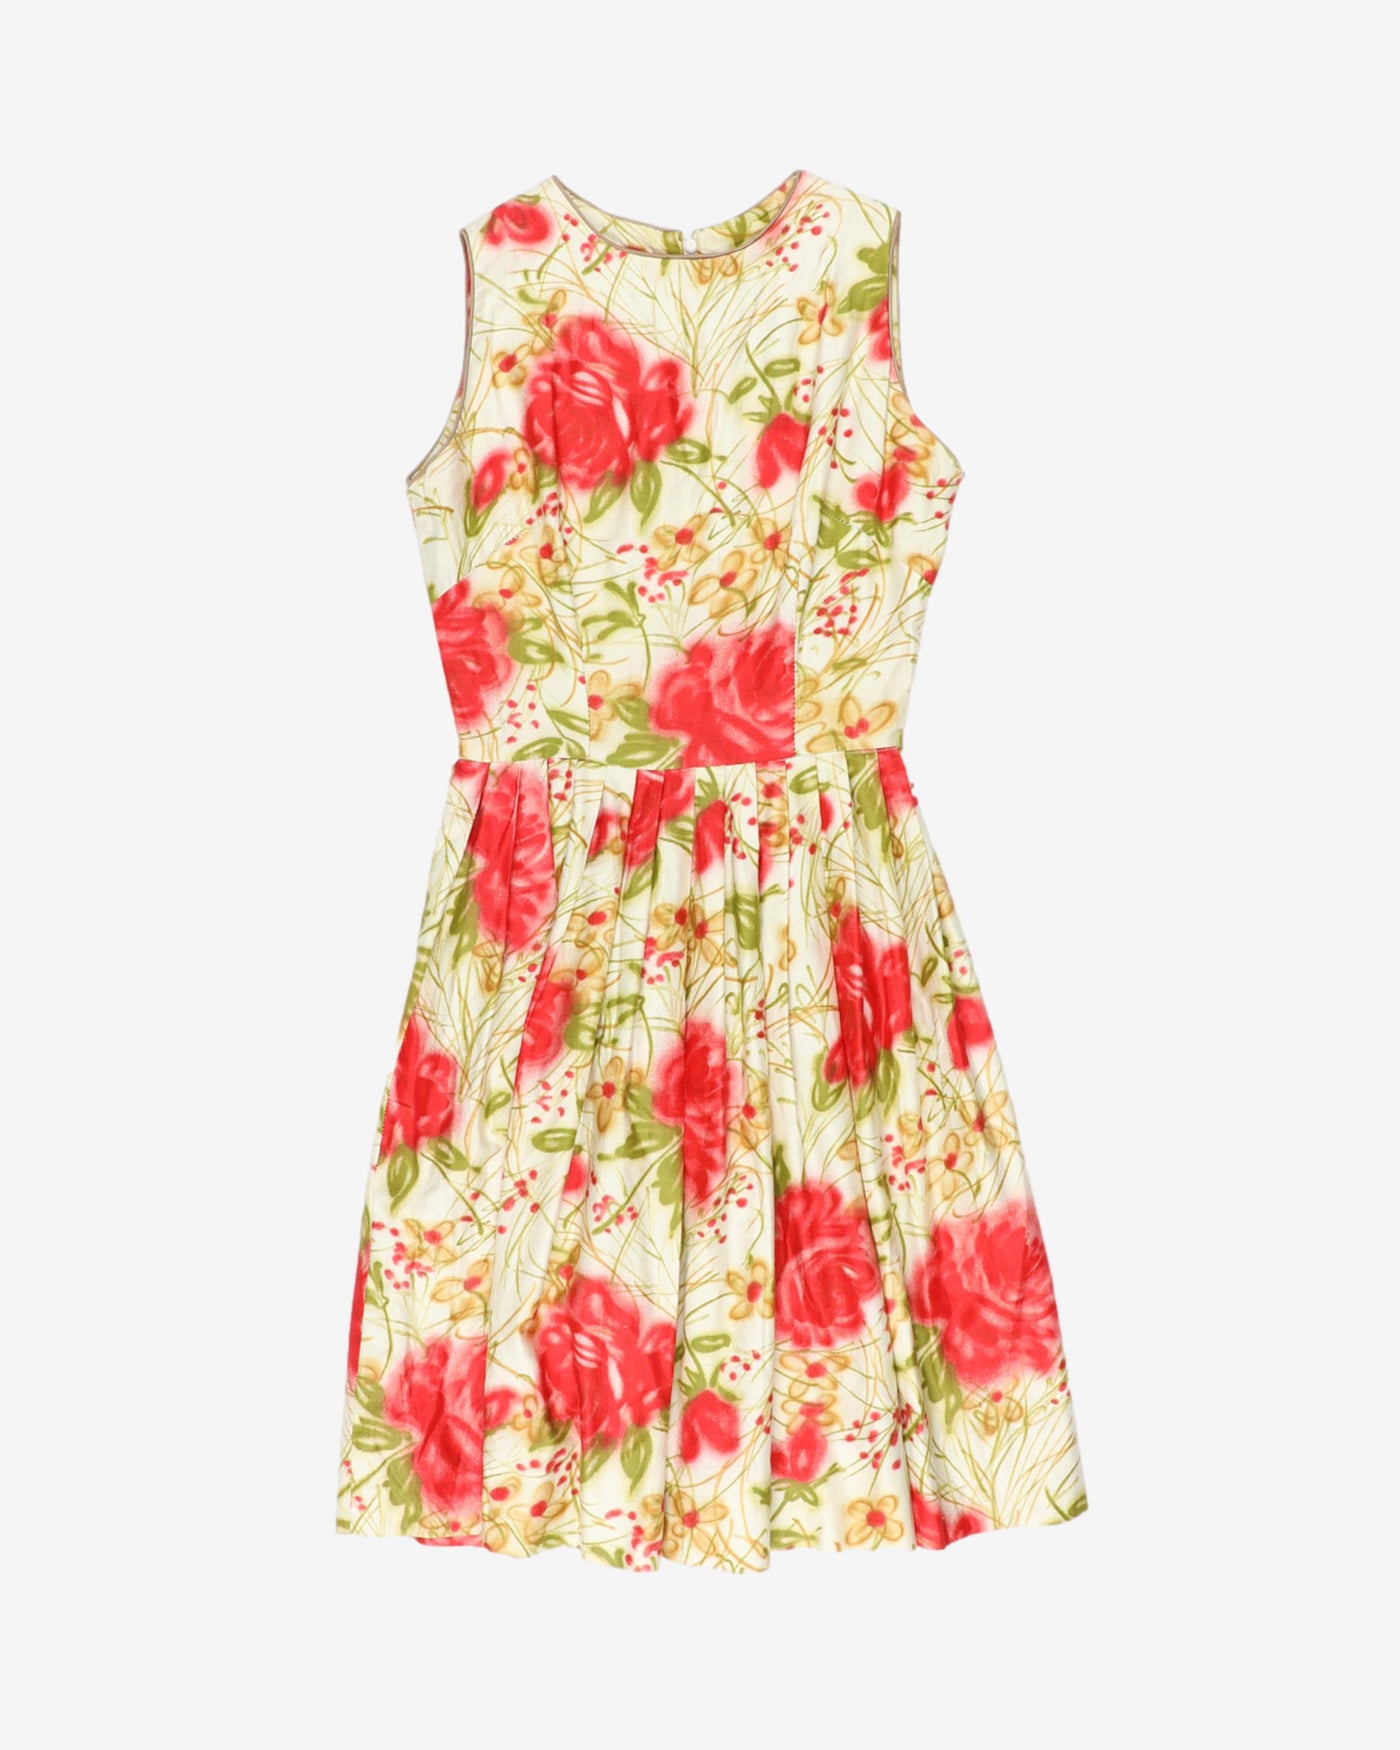 1950's cream with green and red florals dress - S